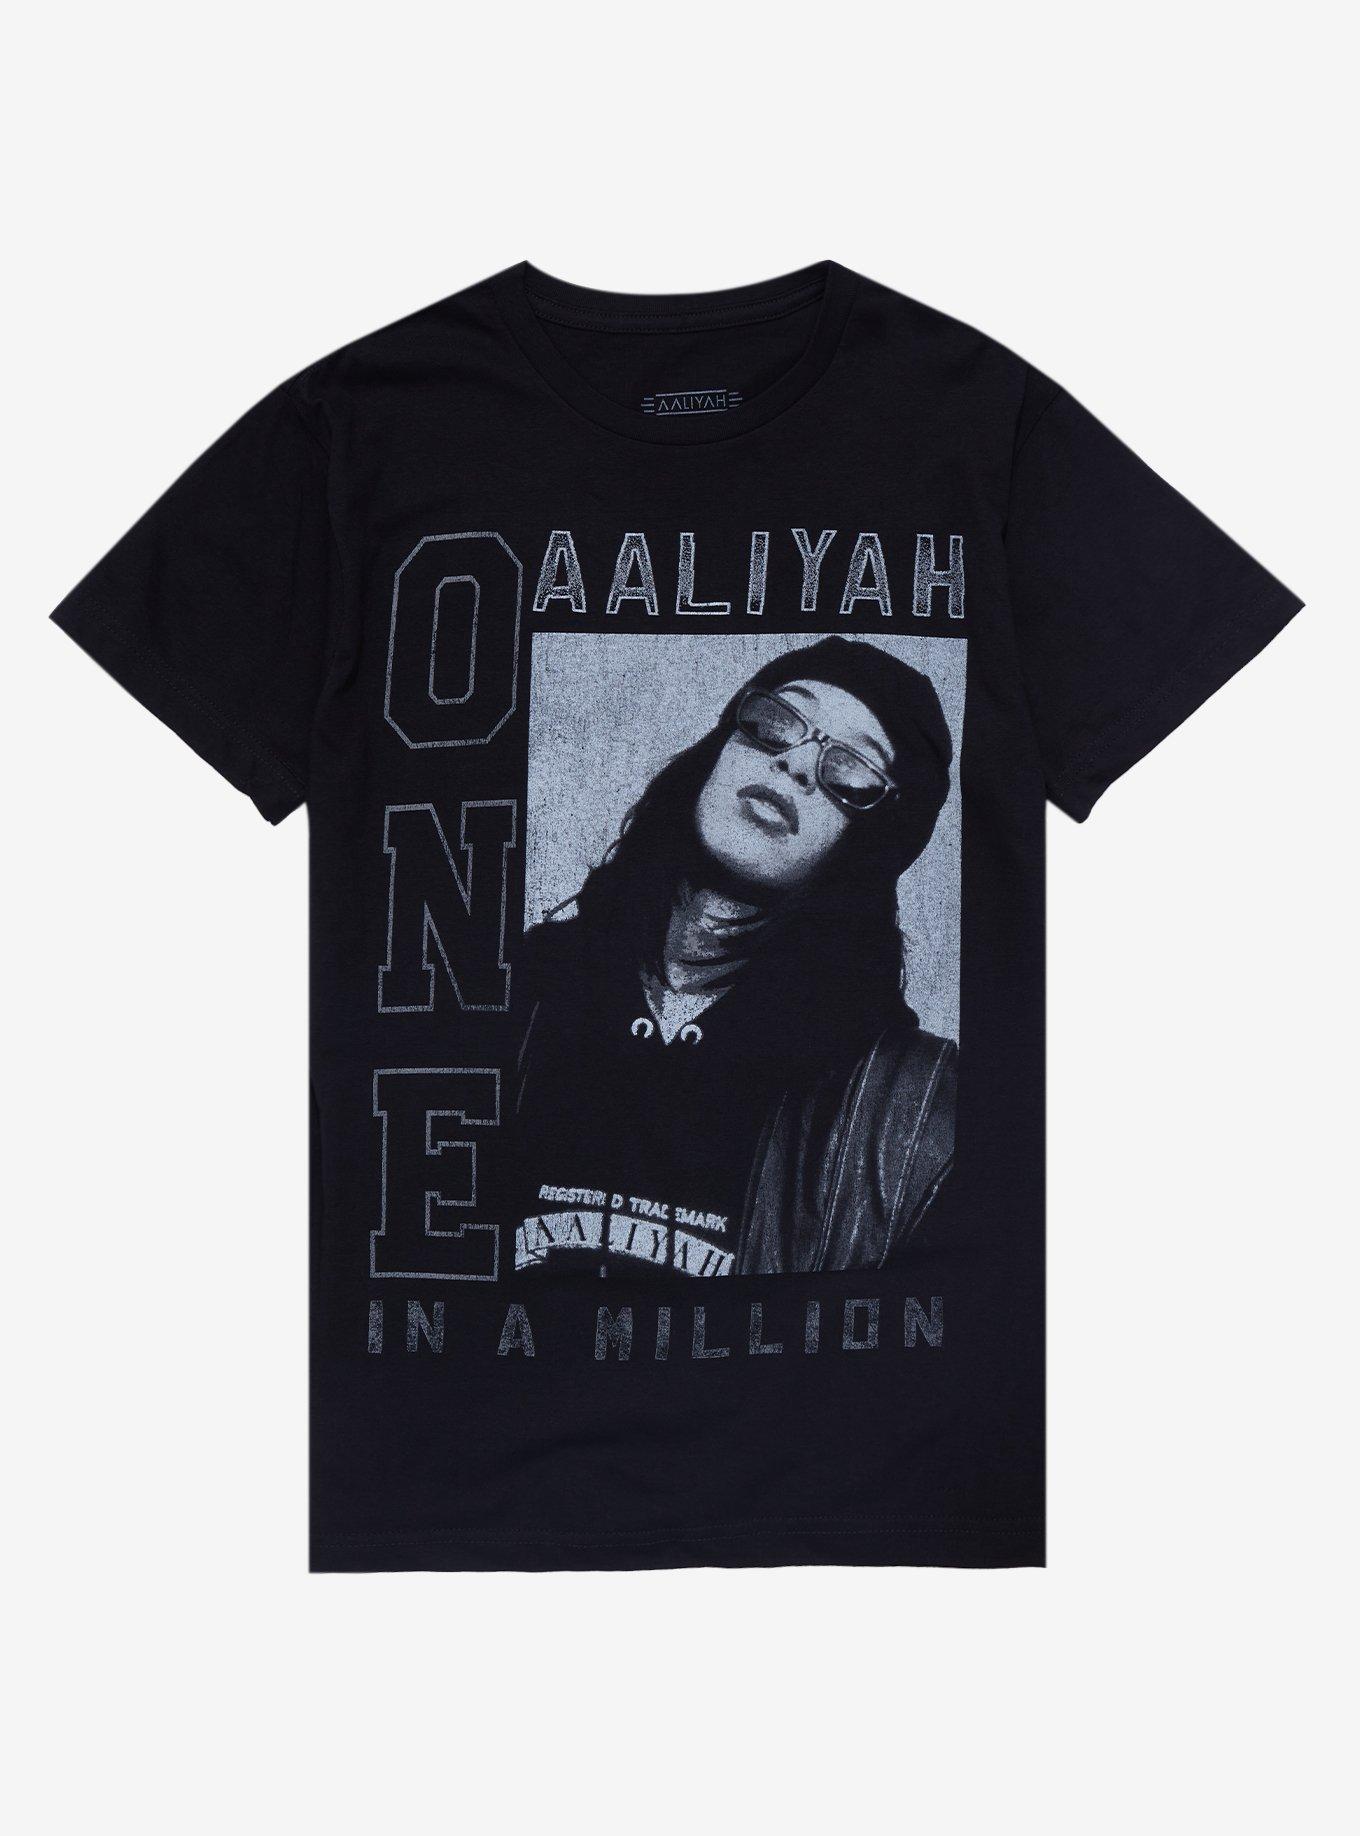 A　In　Million　Aaliyah　One　Hot　Portrait　T-Shirt　Topic